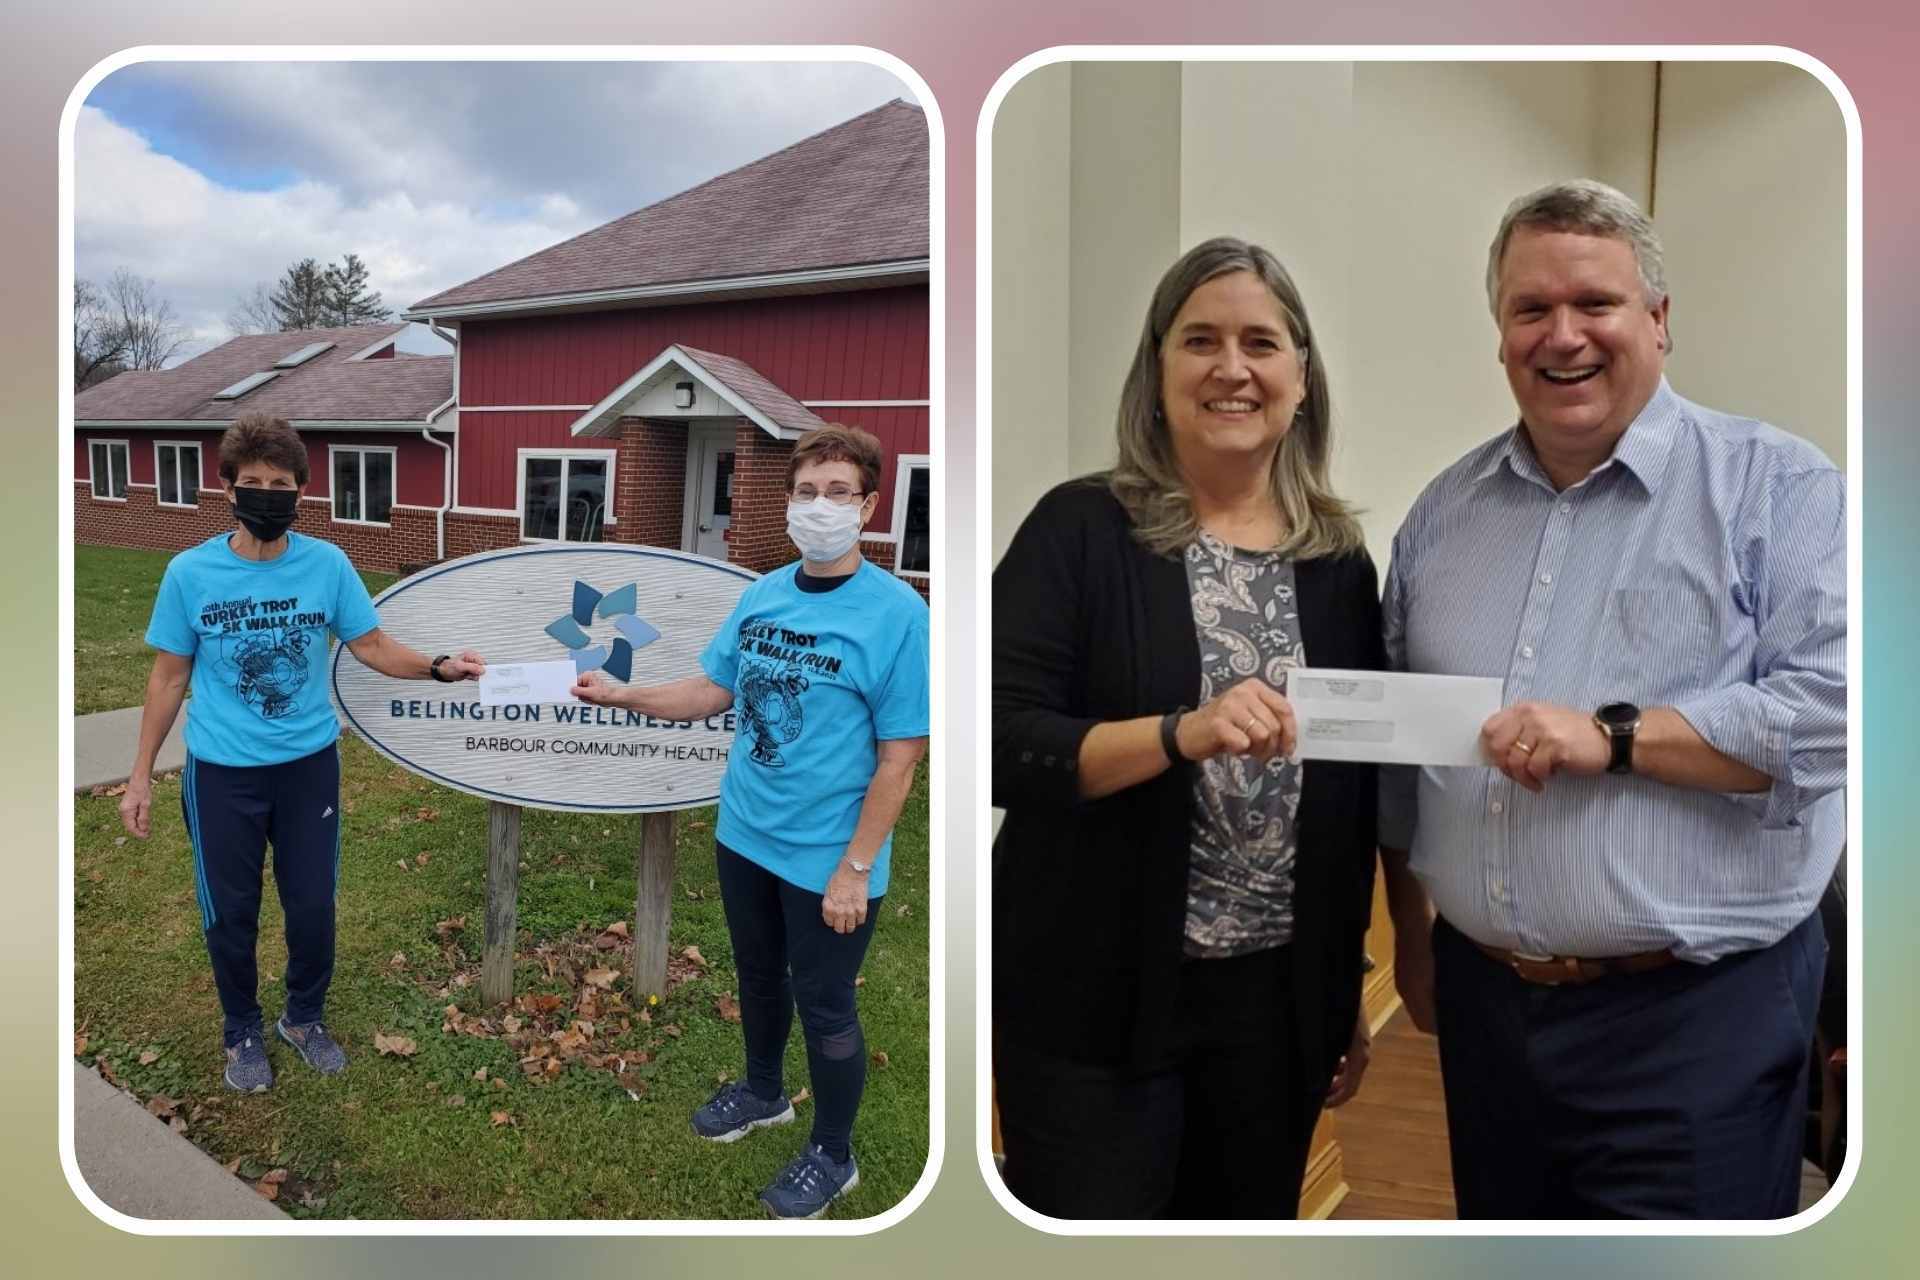 Heart and Hand (left): Eric Ruf, BCHA CEO presents a donation check in the amount of $1,800 to Brenda Hunt, Executive Director at Heart and Hand House, Inc. The funds will be used to help the organization feed roughly 400 individuals and families this Thanksgiving. Presbyterian Church (right): Denise Holbert (right), Belington Wellness Center Manager presents a donation check to Julie Feather (left), Belington Presbyterian Church representative. Belington Presbyterian Church received $1,800 in funds from the 10th annual Turkey Trot.